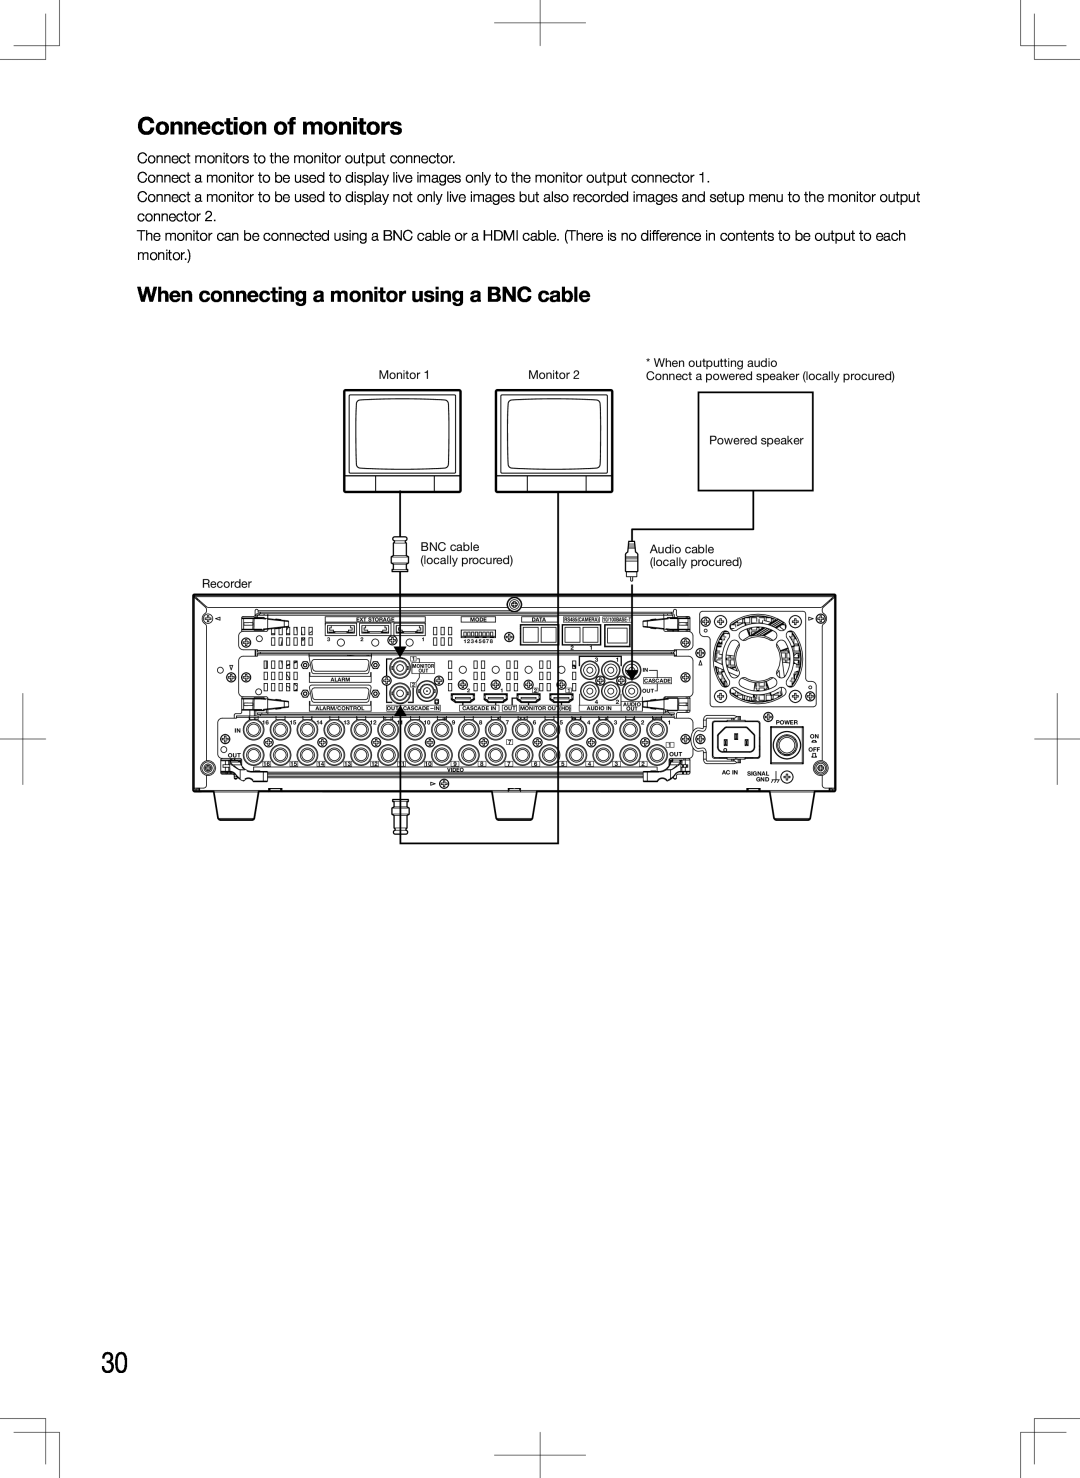 Panasonic WJ-HD716K, WJ-HD616K manual Connection of monitors, When connecting a monitor using a BNC cable 